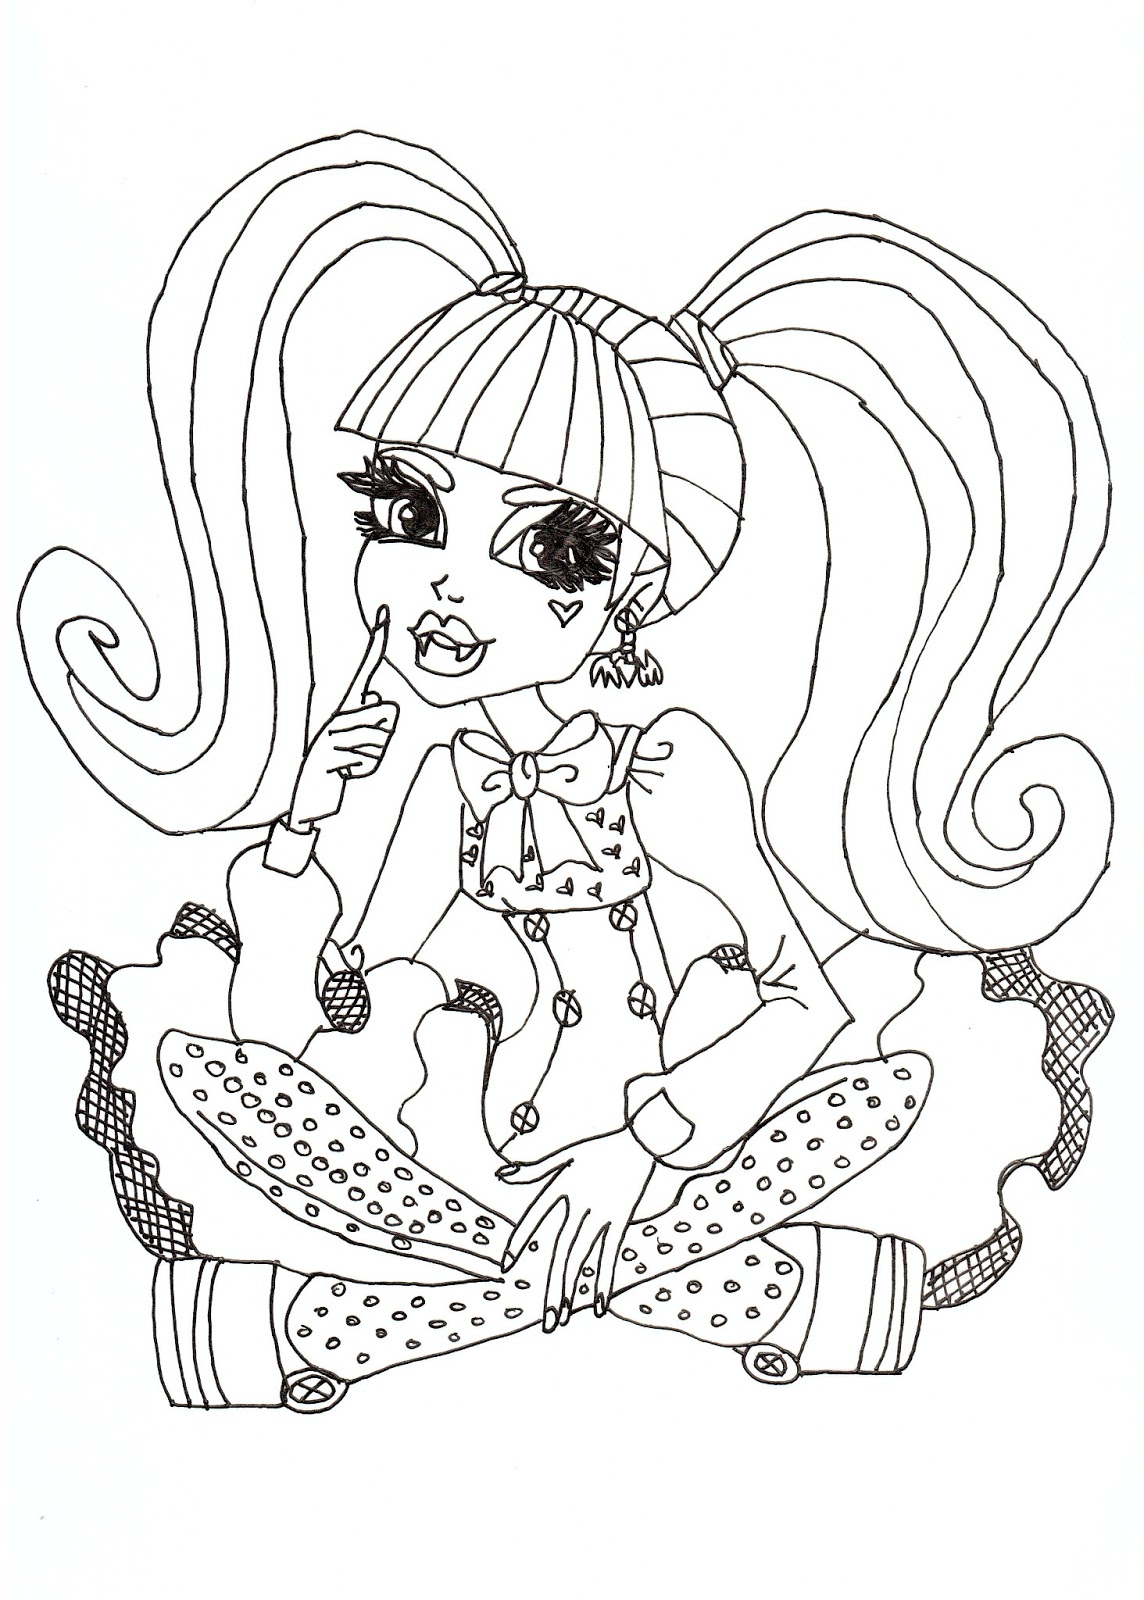 free-printable-monster-high-coloring-pages-monster-high-draculaura-free-coloring-sheet